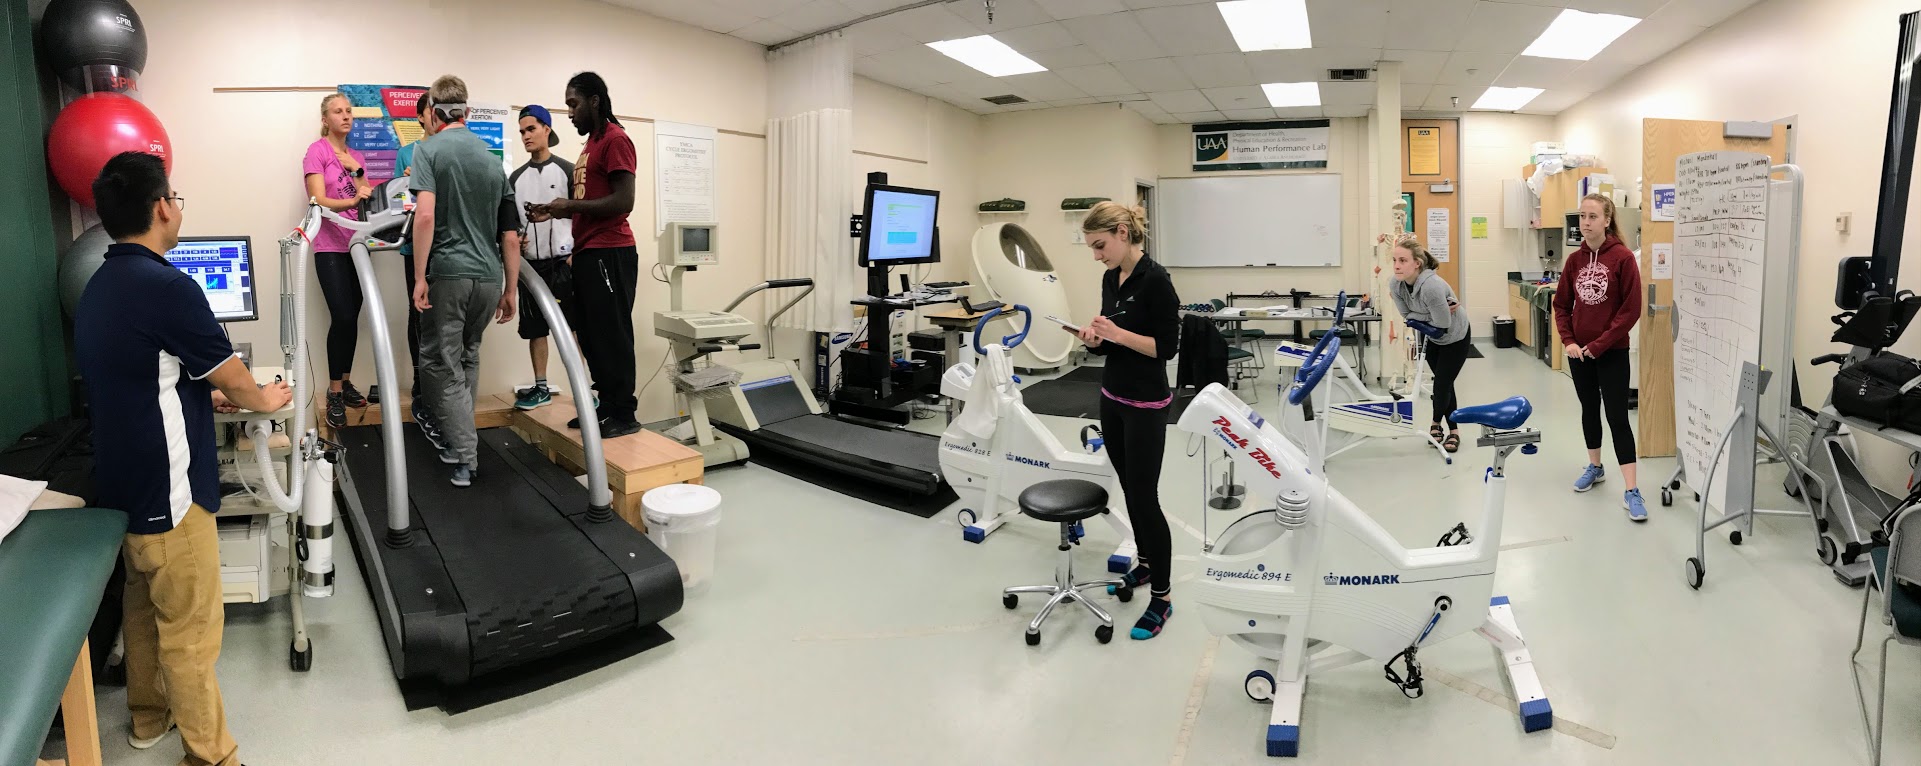 Students in the human performance lab practice administering tests